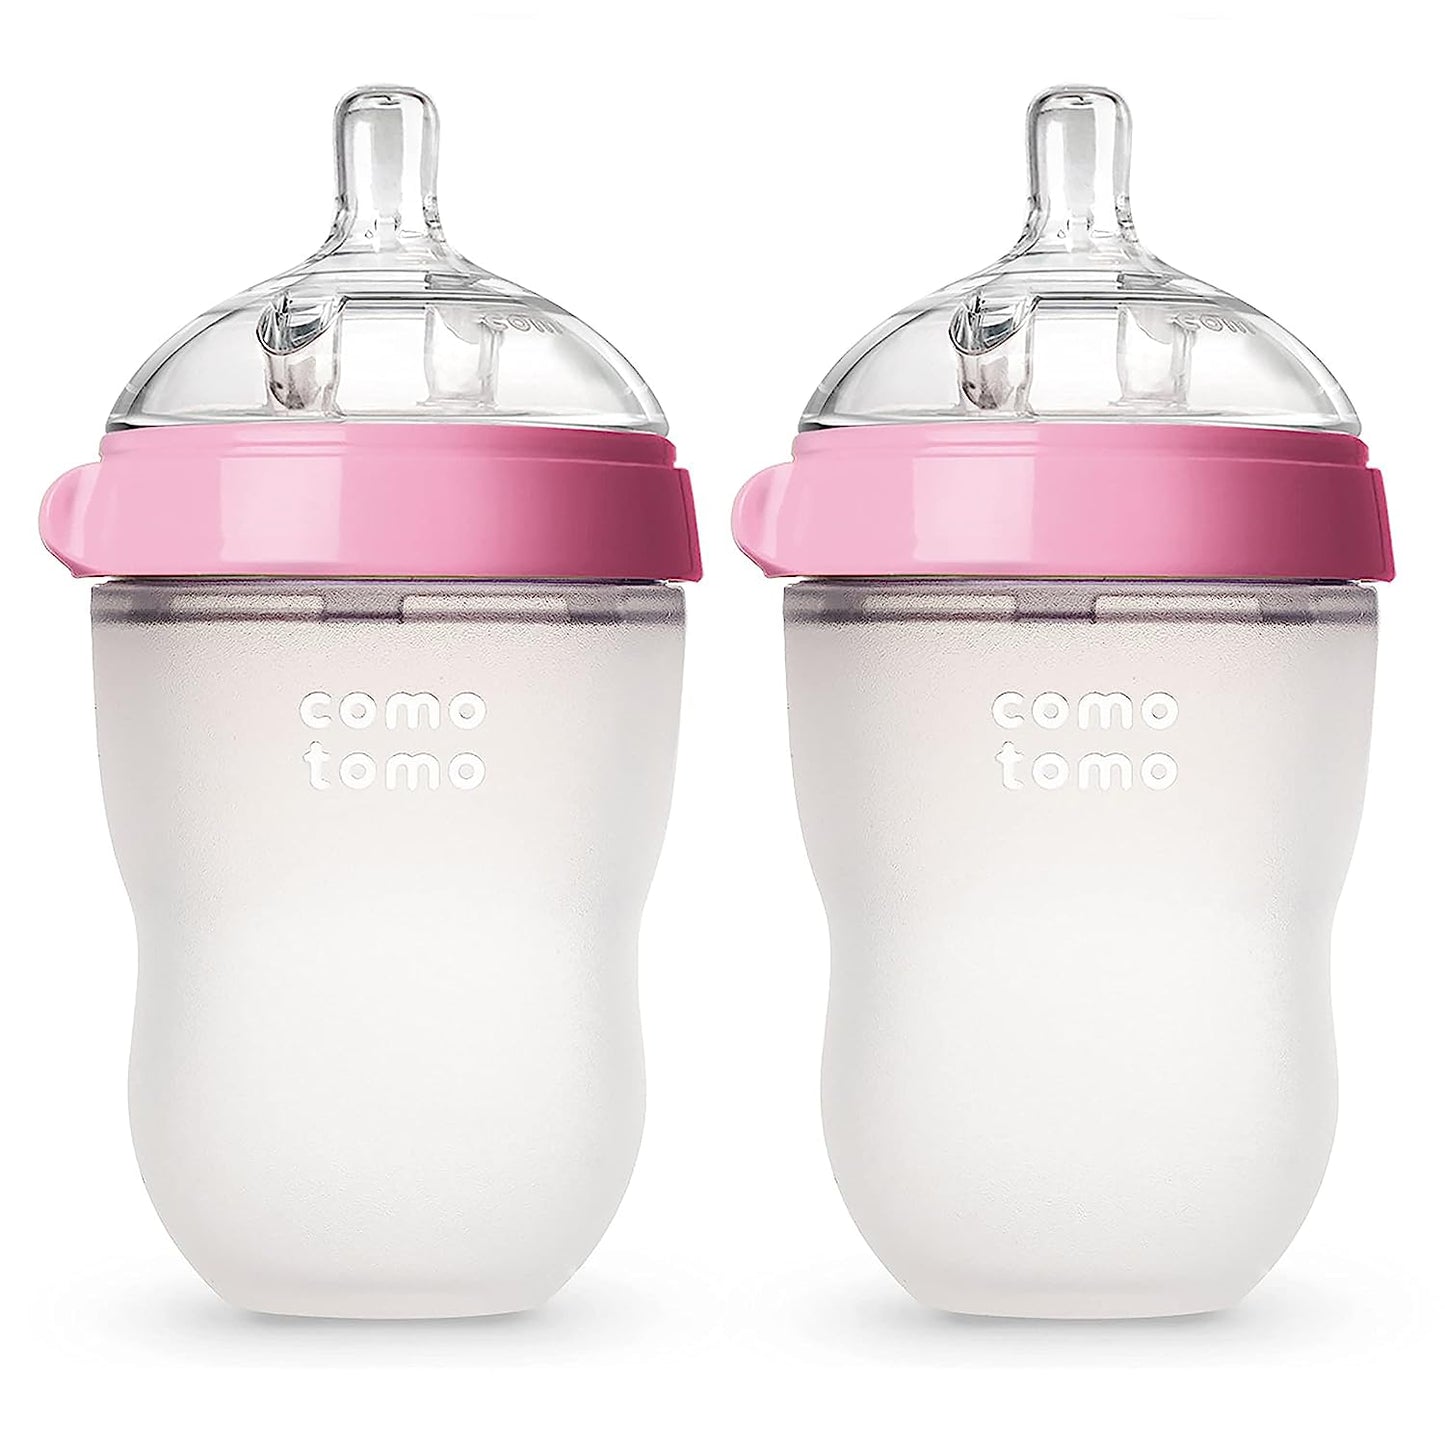 Comotomo Baby Bottle, Pink, 5 Ounce, 2 Count (Pack of 1)